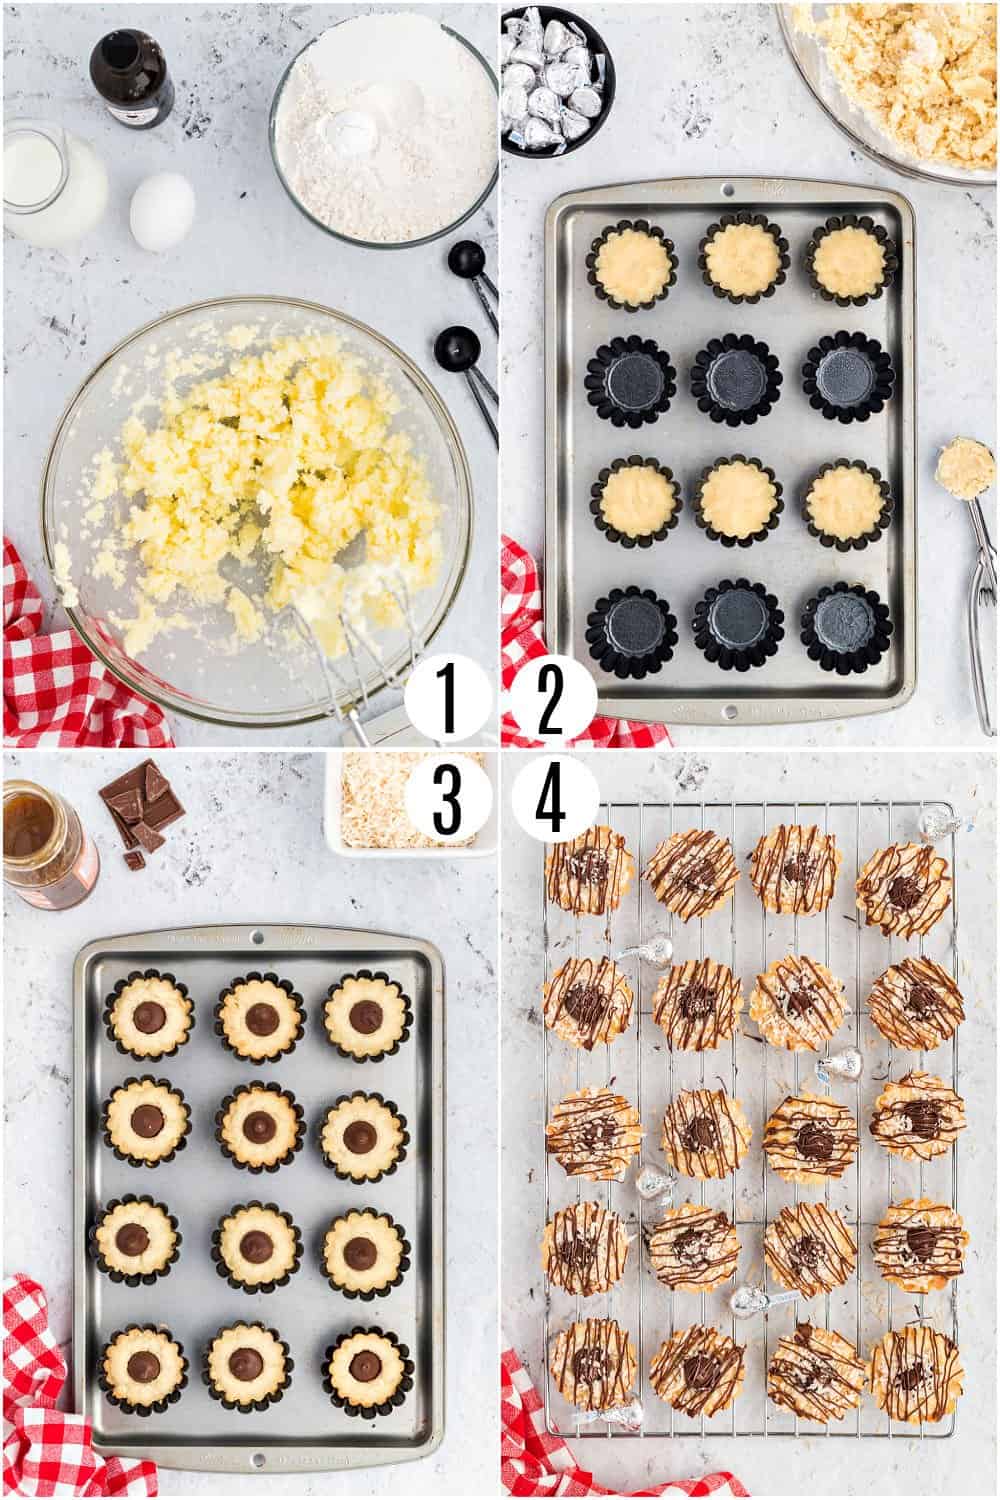 Step by step photos showing how to make coconut kiss cookies.